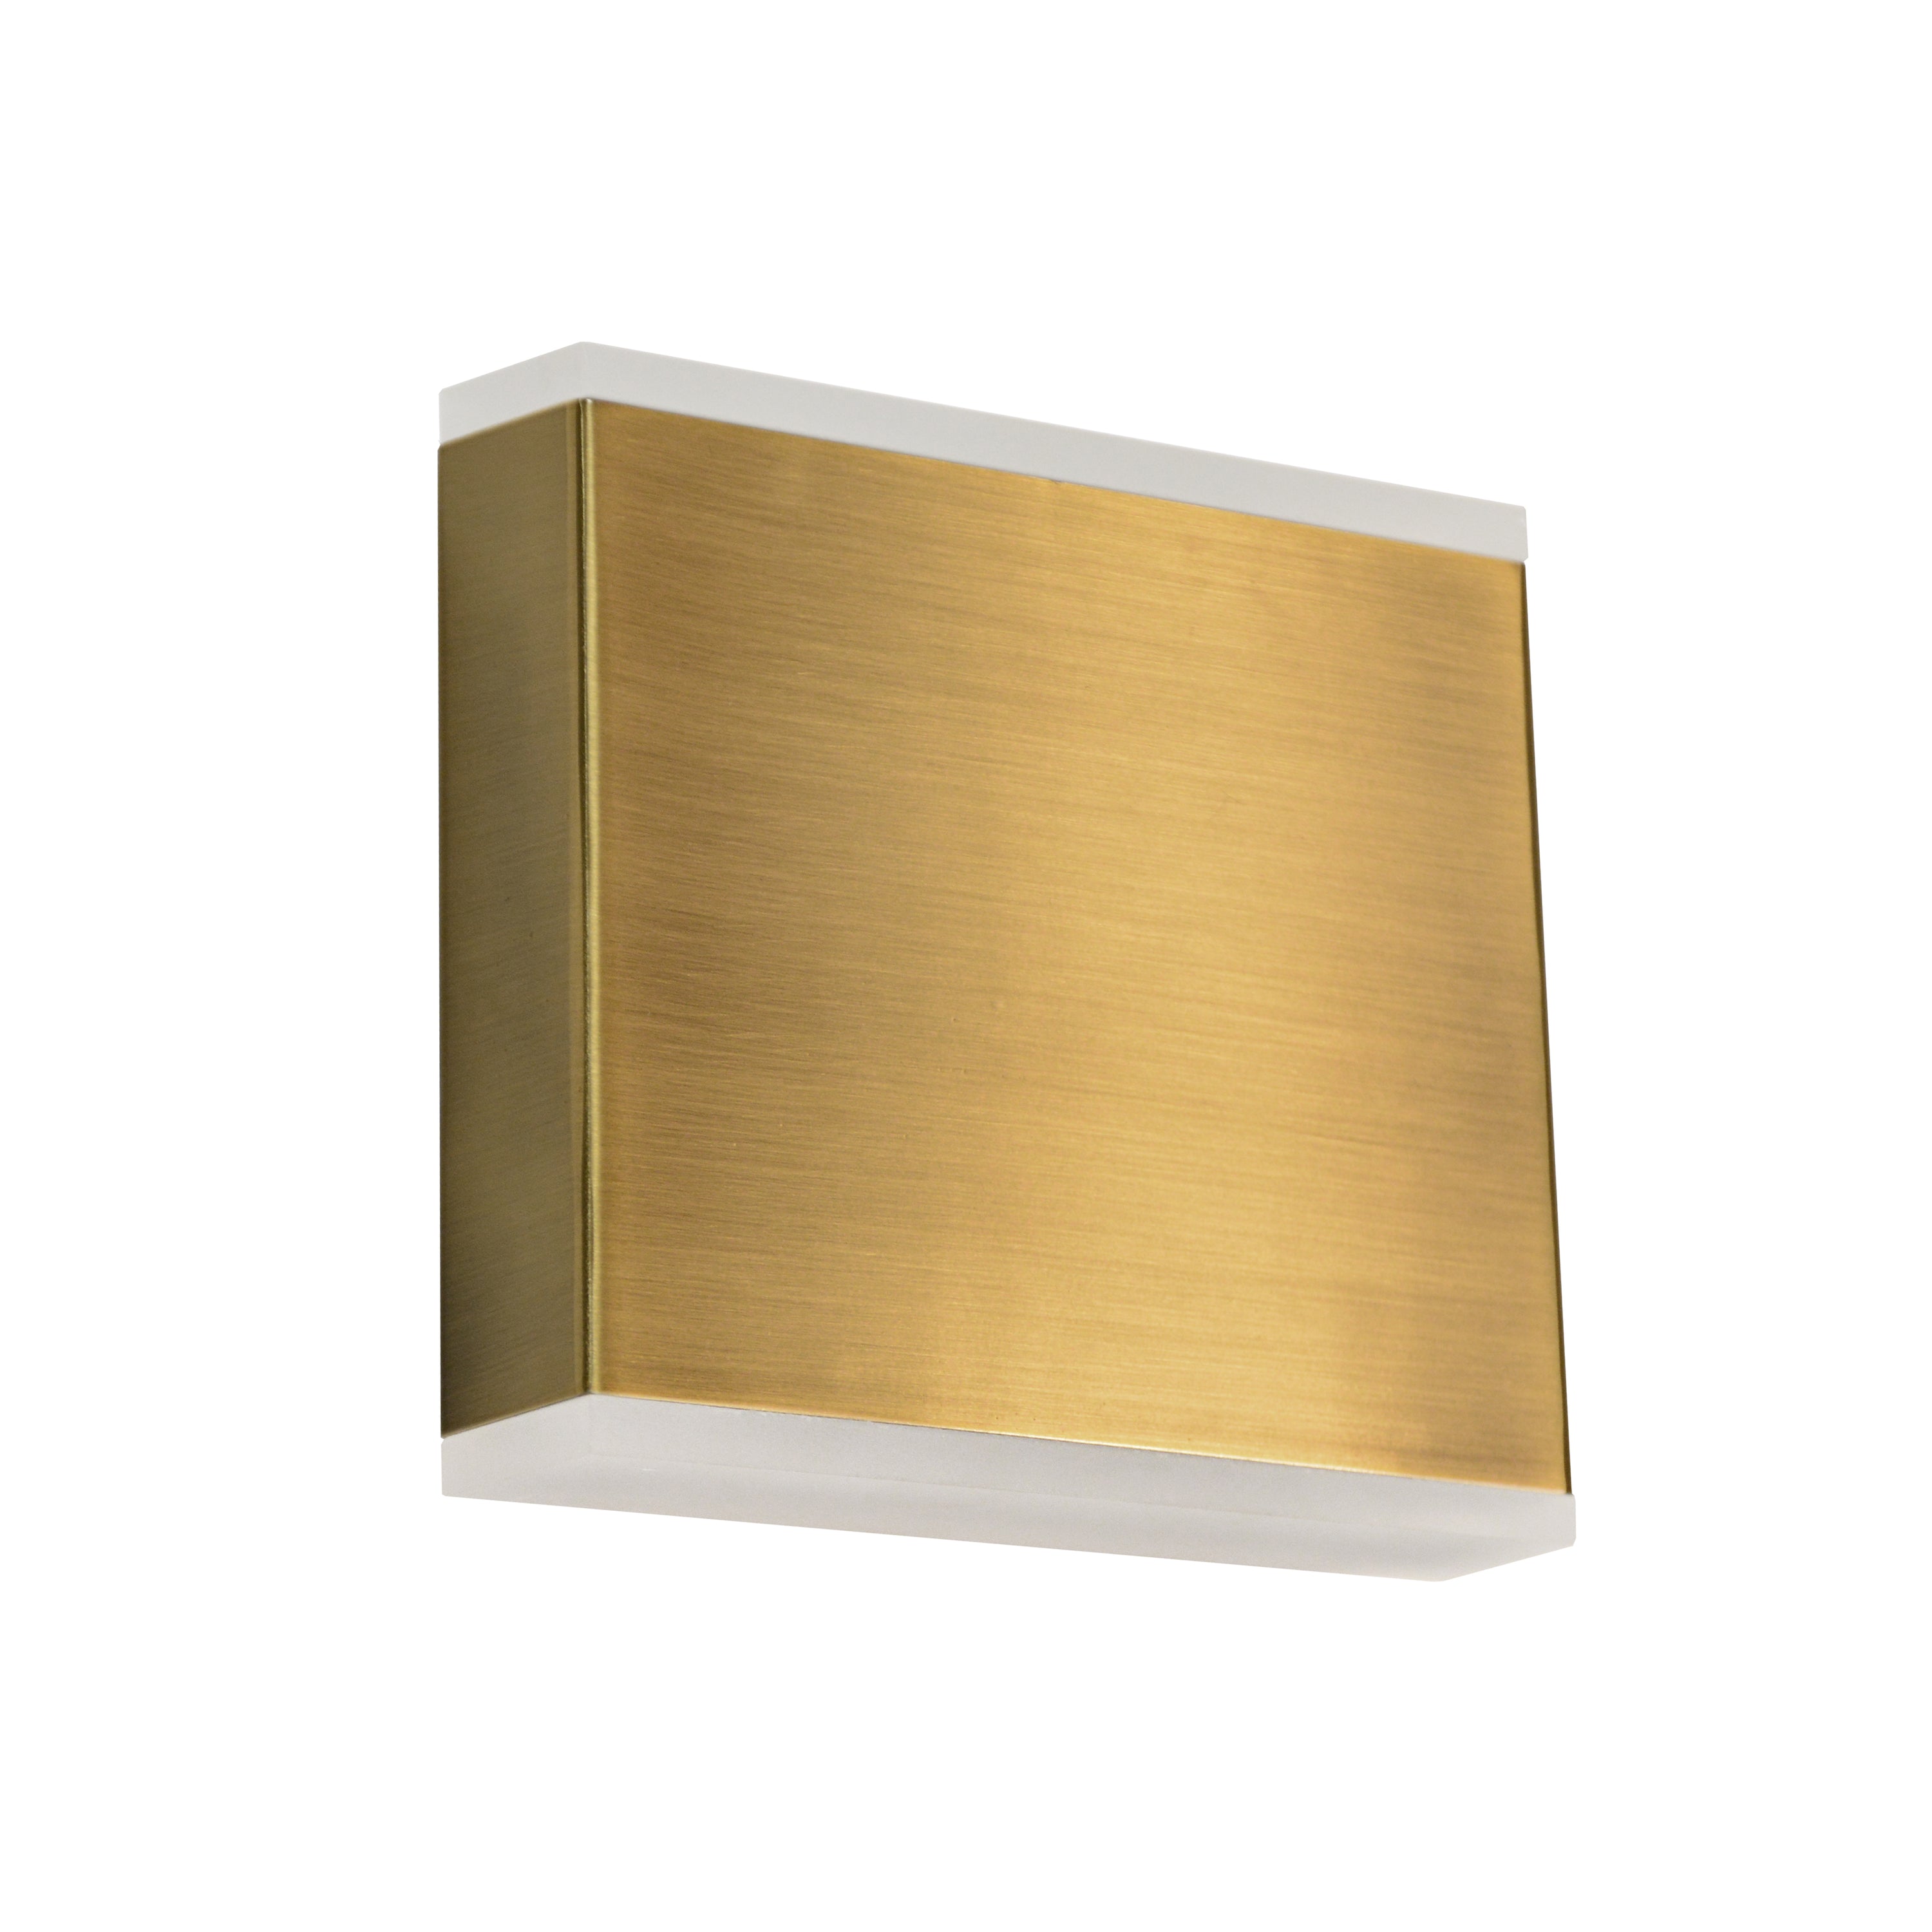 Dainolite Emery - EMY-550-5W-AGB - 15W LED Wall Sconce, Aged Brass with Frosted Acrylic Diffuser - Aged Brass